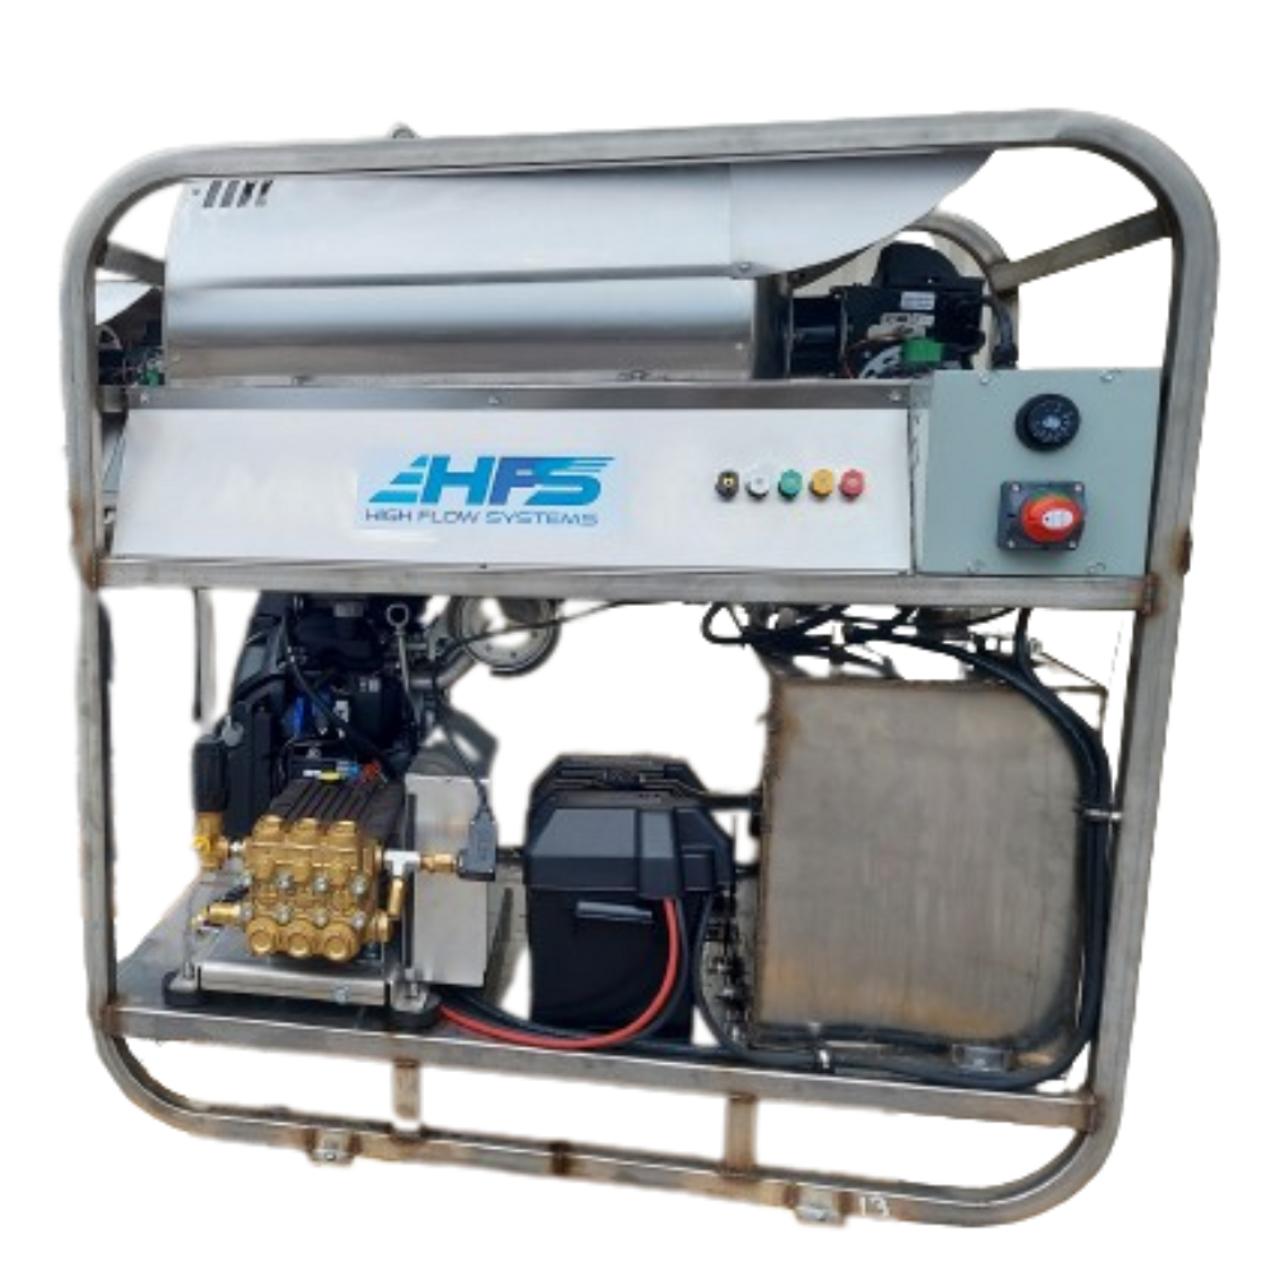 HFS Stainless Hot Water Pressure Washer featuring a Honda iGX800 engine, General Pump 3500 PSI @ 8 GPM